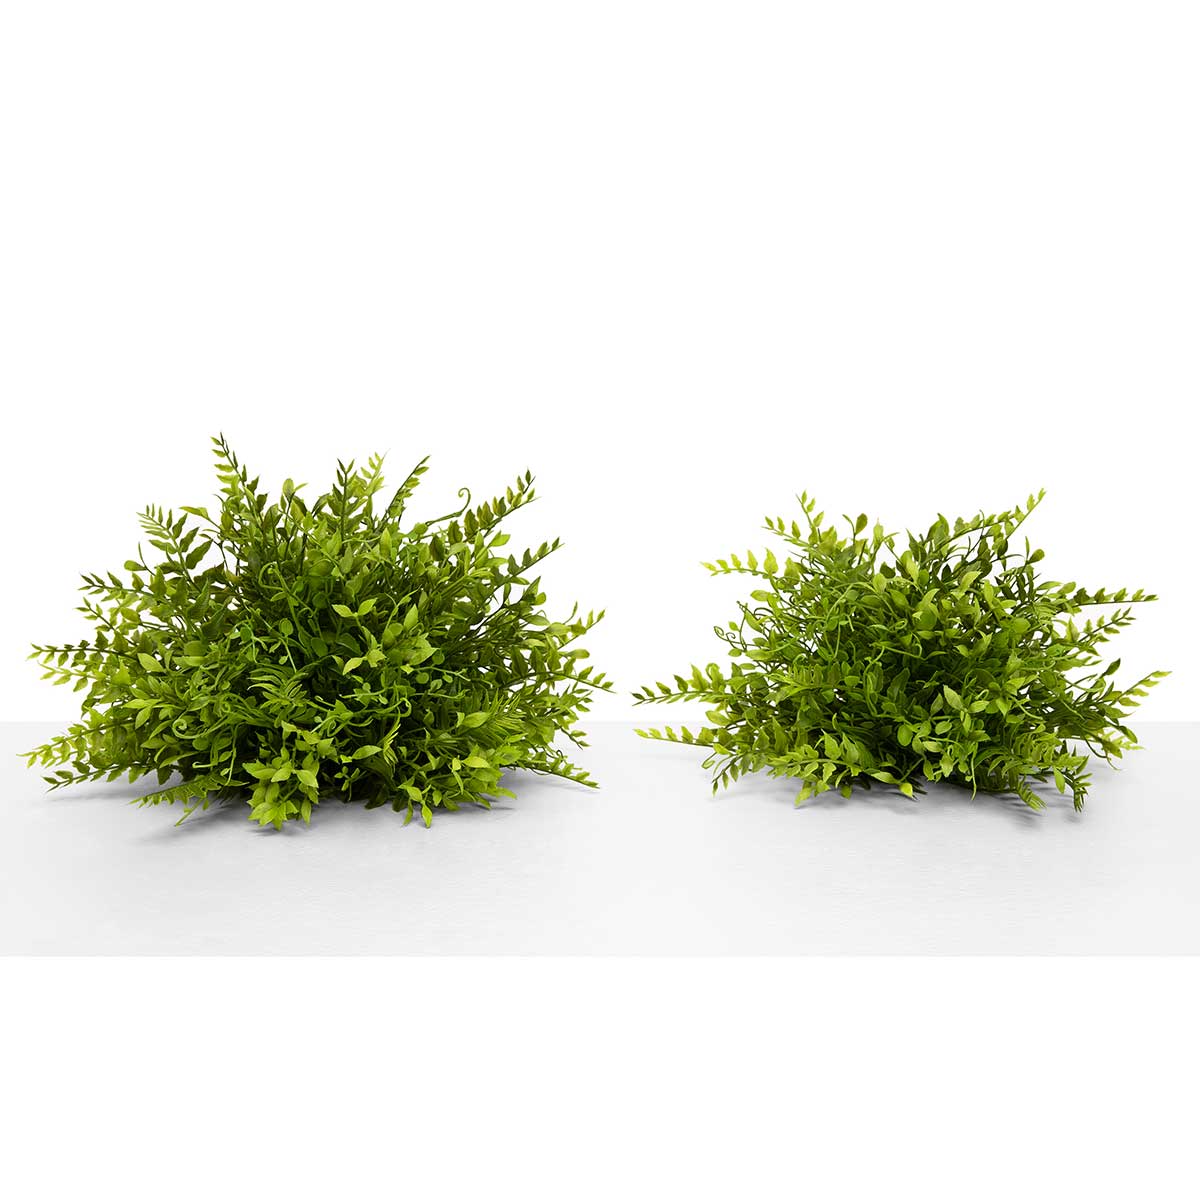 DOME MINI PRIVET AND FERN LARGE 10IN X 7IN